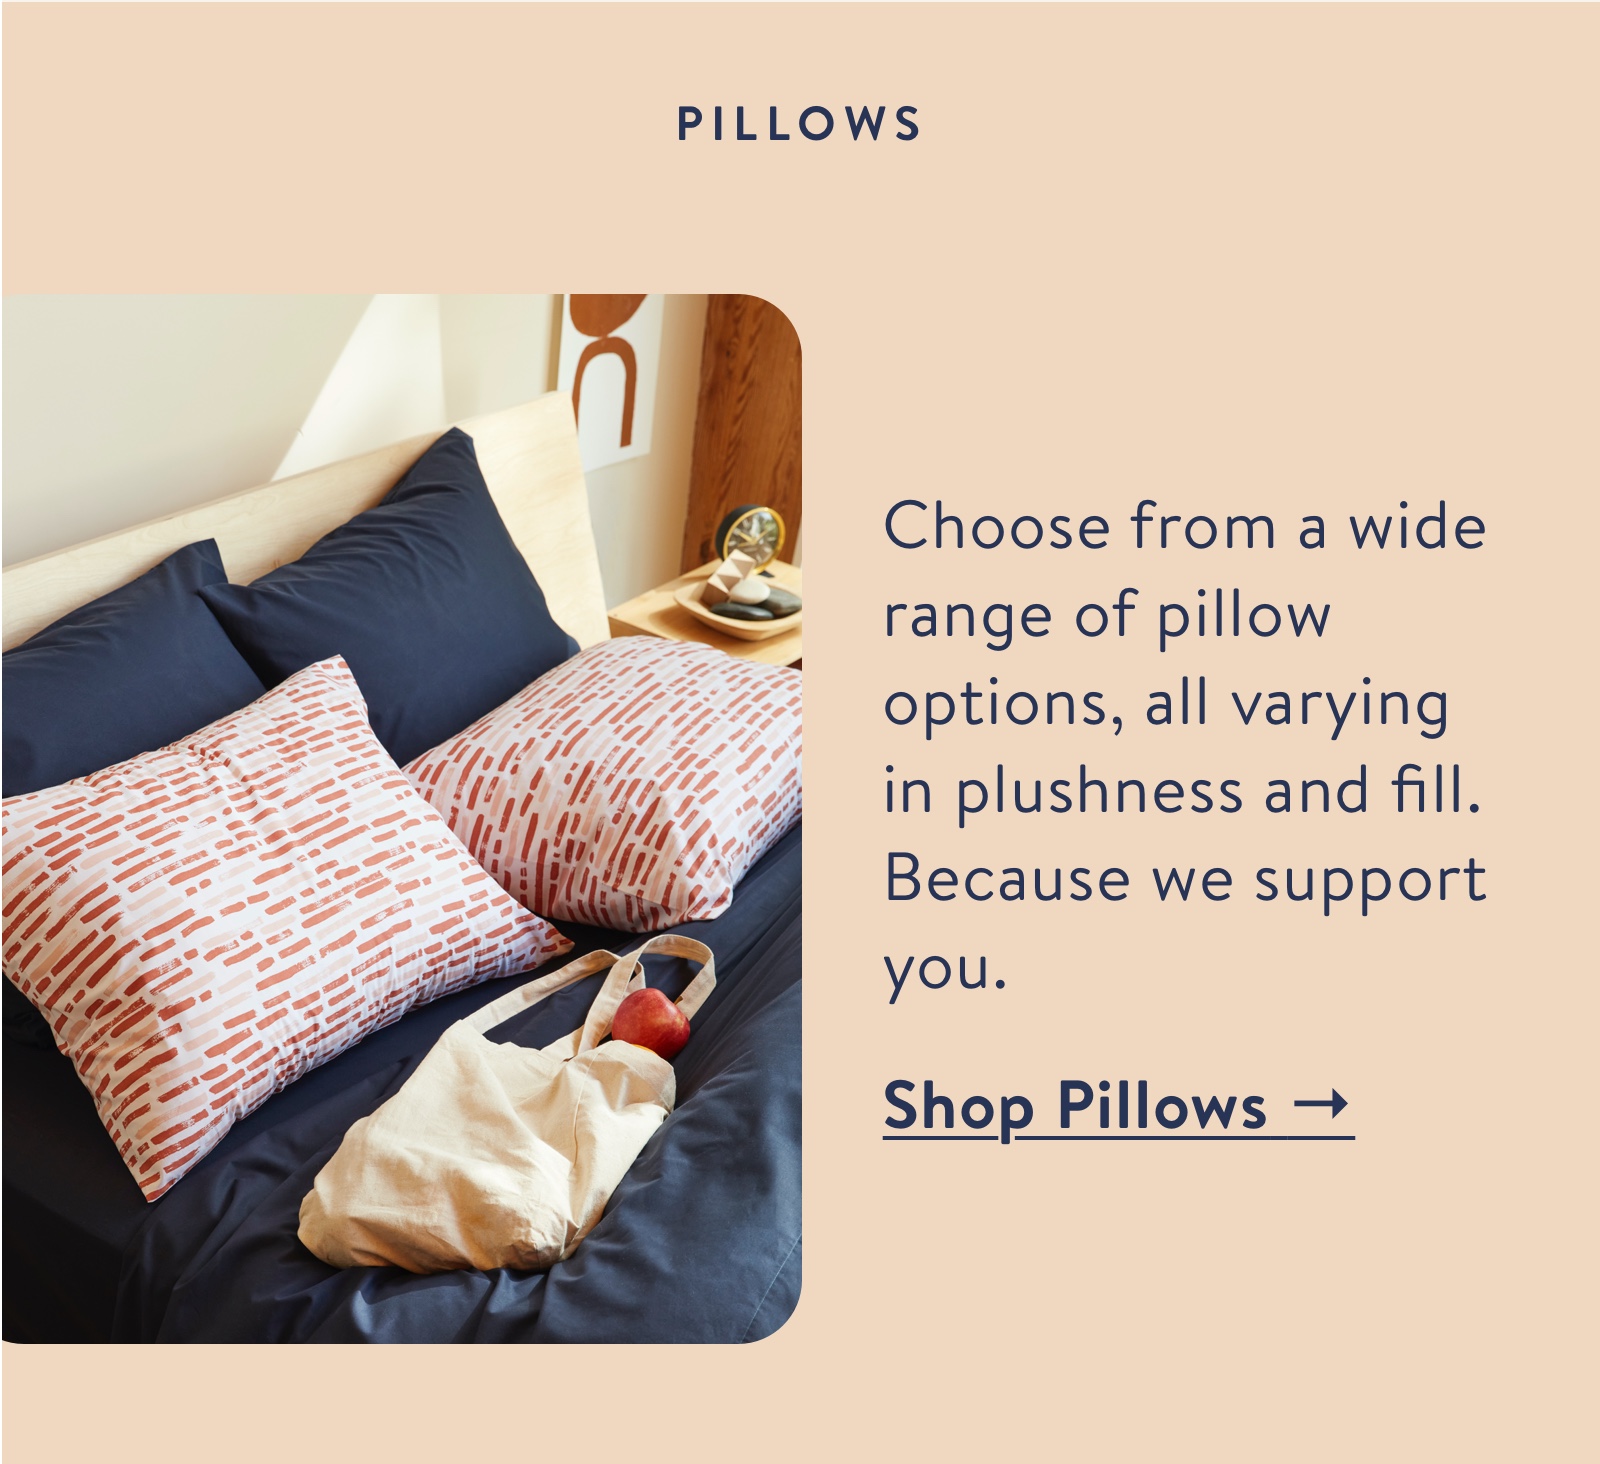 Choose from a wide range of pillow options, all varying in plushness and fill.